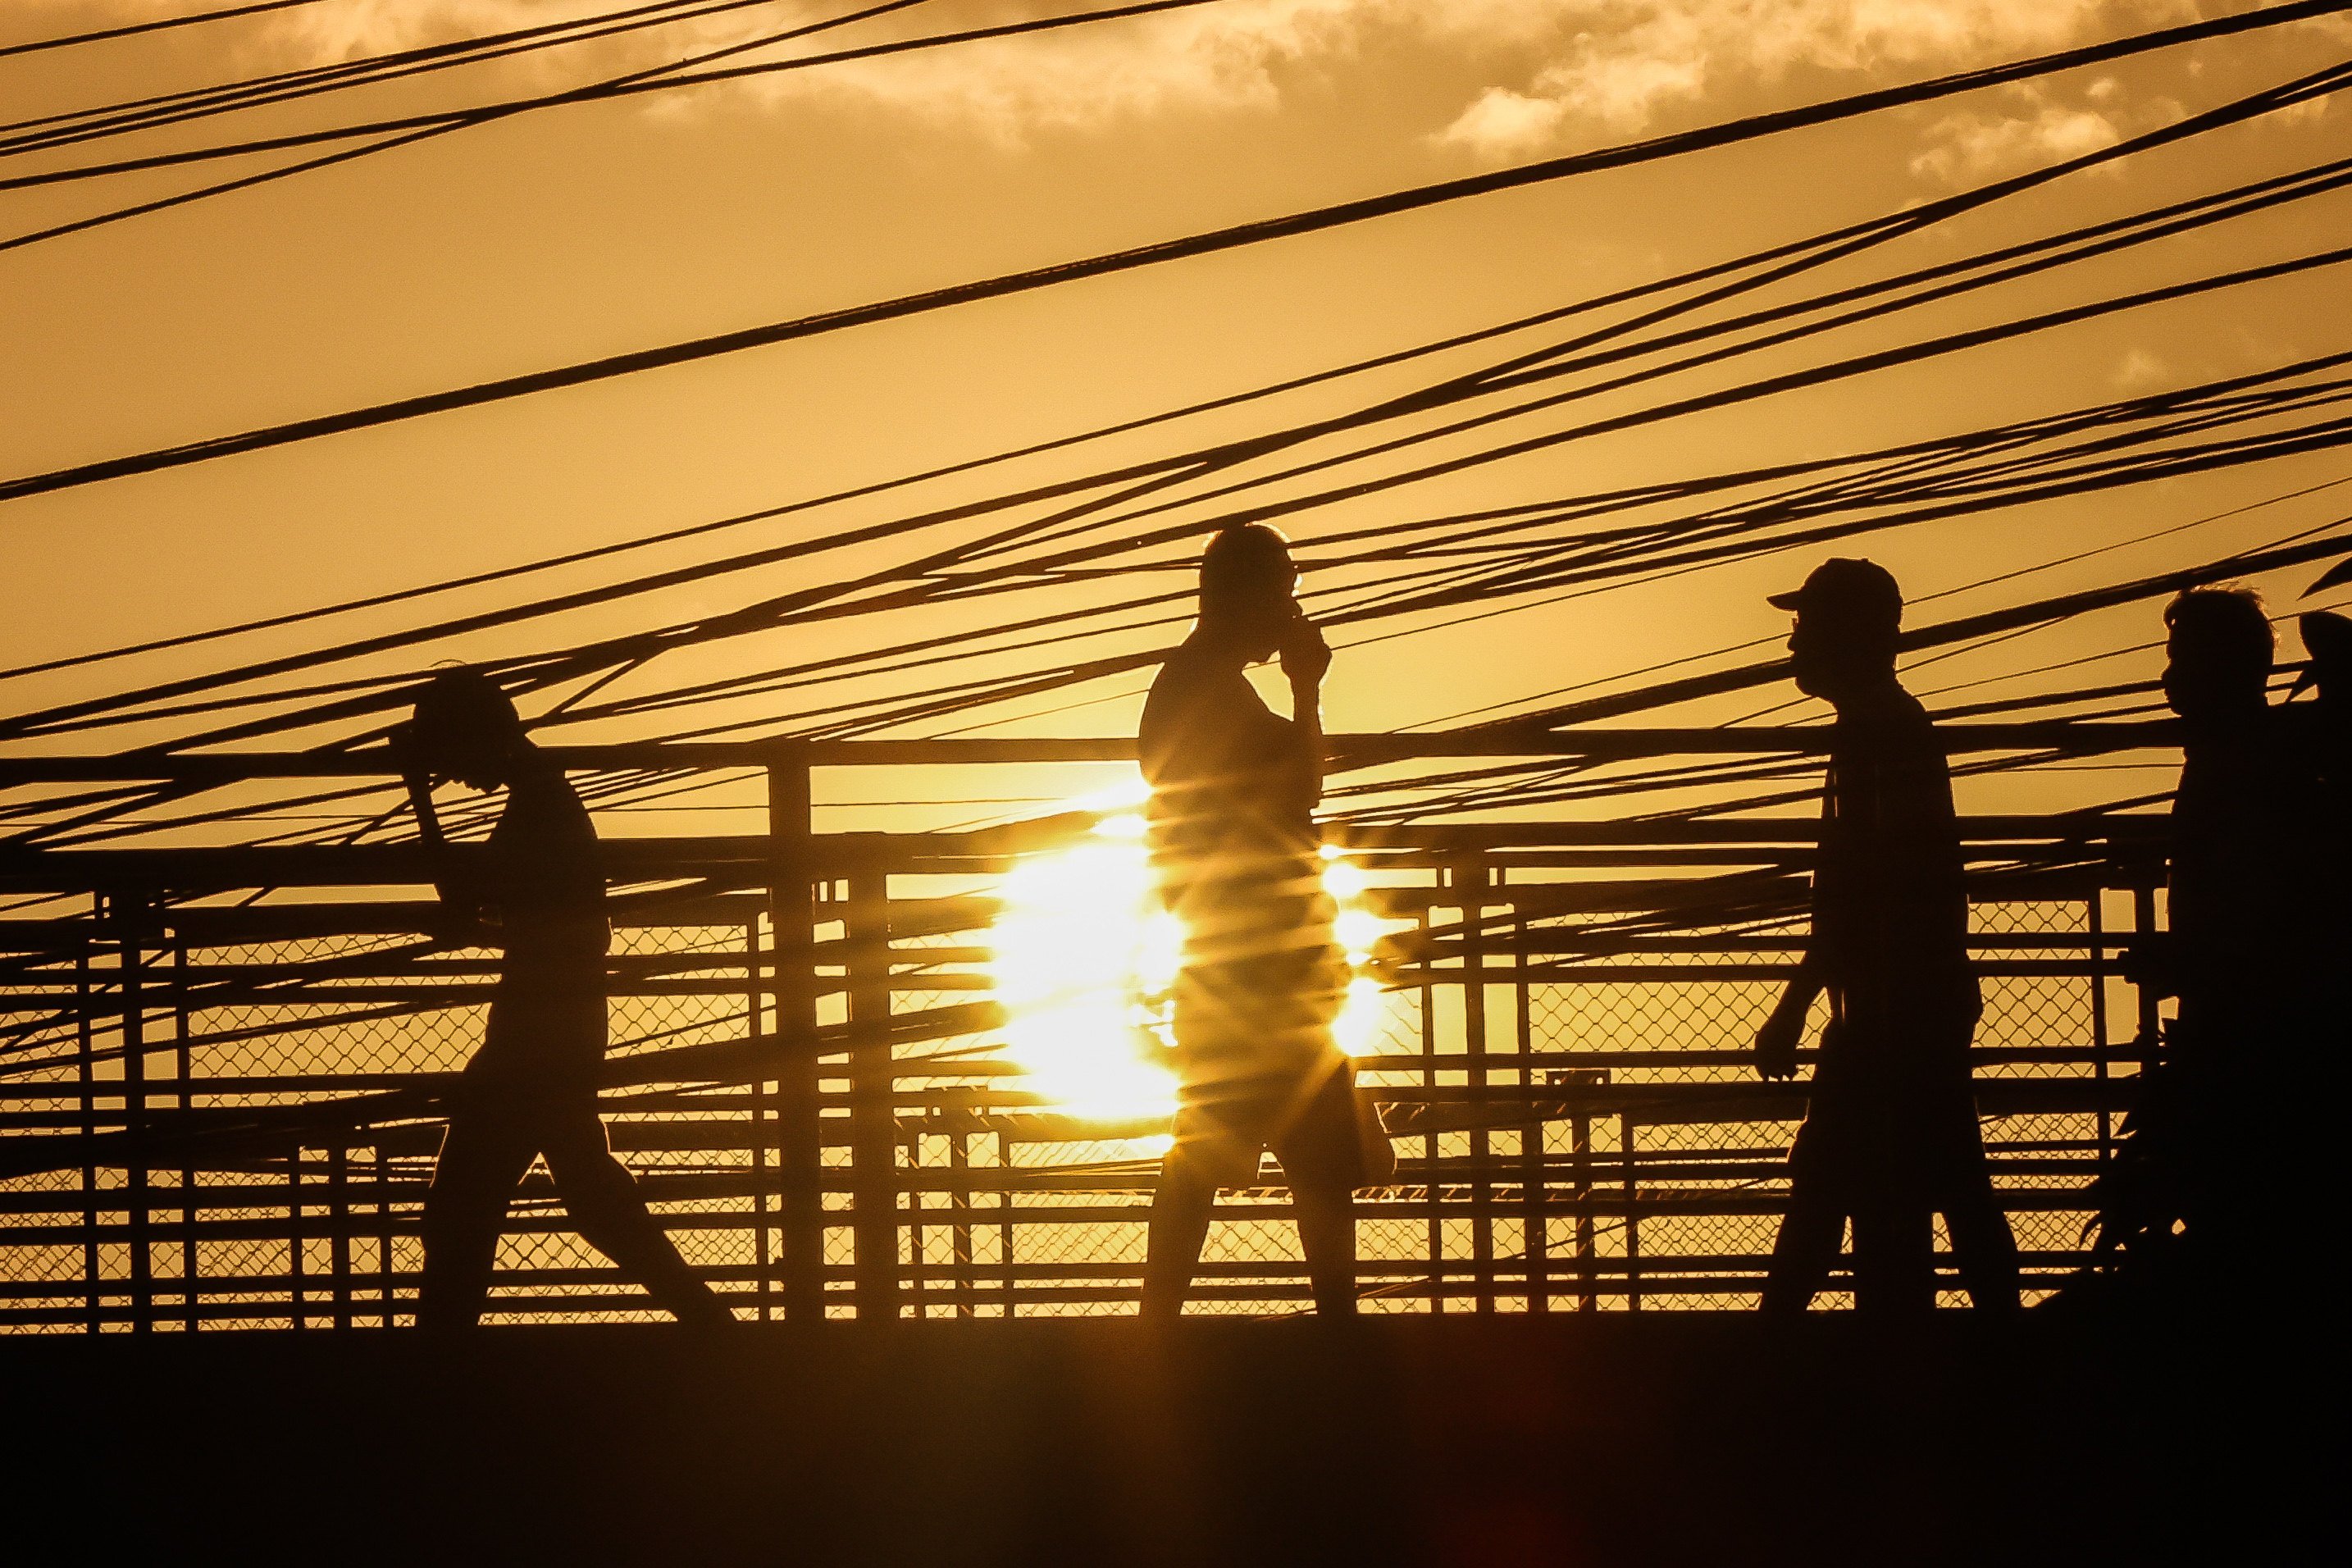 People walk through scorching heat in Quezon City during April’s intense heatwave, which officials have partly blamed for the Philippines’ current power crisis. Photo: Xinhua